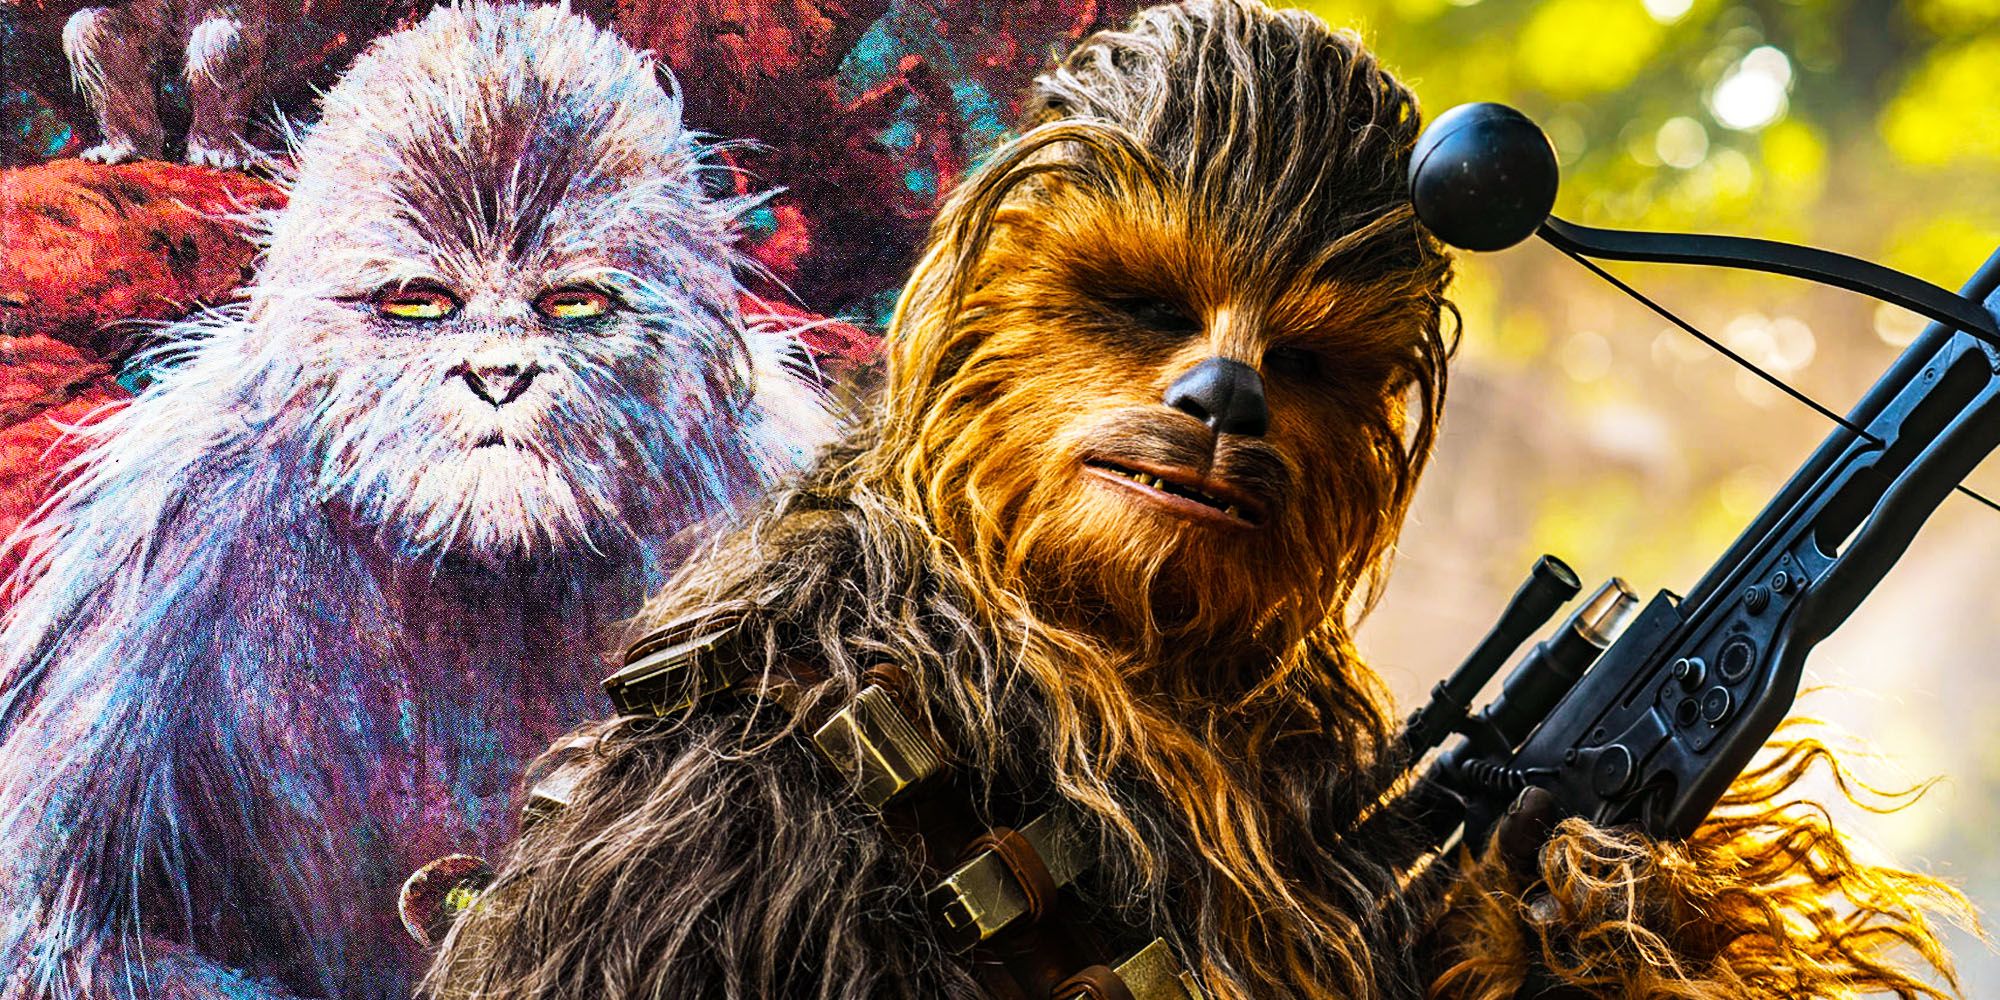 George R R Martin inspired Star Wars Chewbacca design and seven times never kill a man